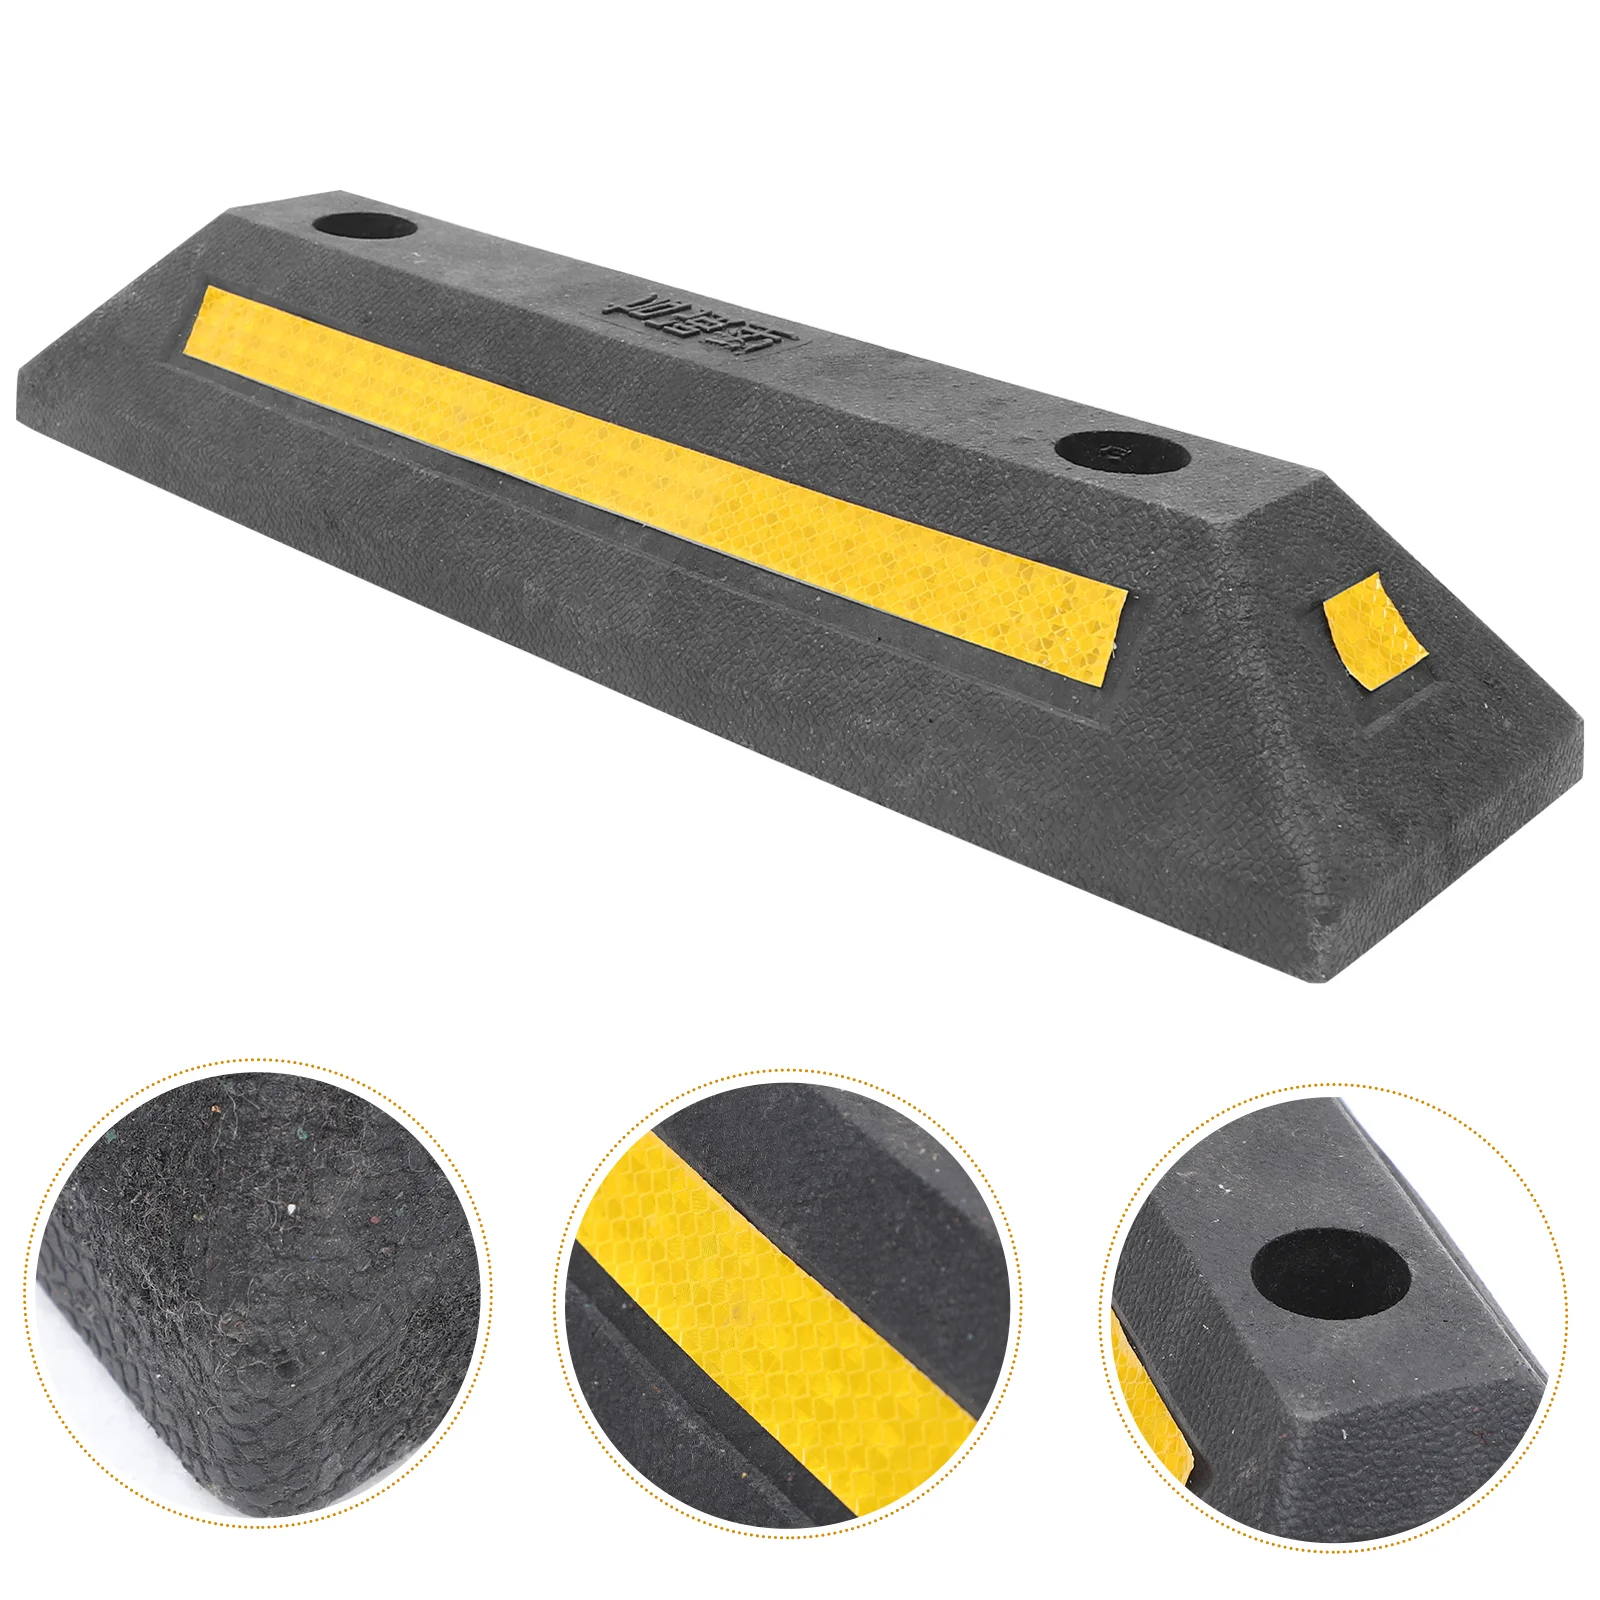 

Stopper Parking Garage Car Lot Wheel Stop Rubber Stoppers Driveway Vehicles Automotive Stops Block Truck Accessories Gadgets Aid